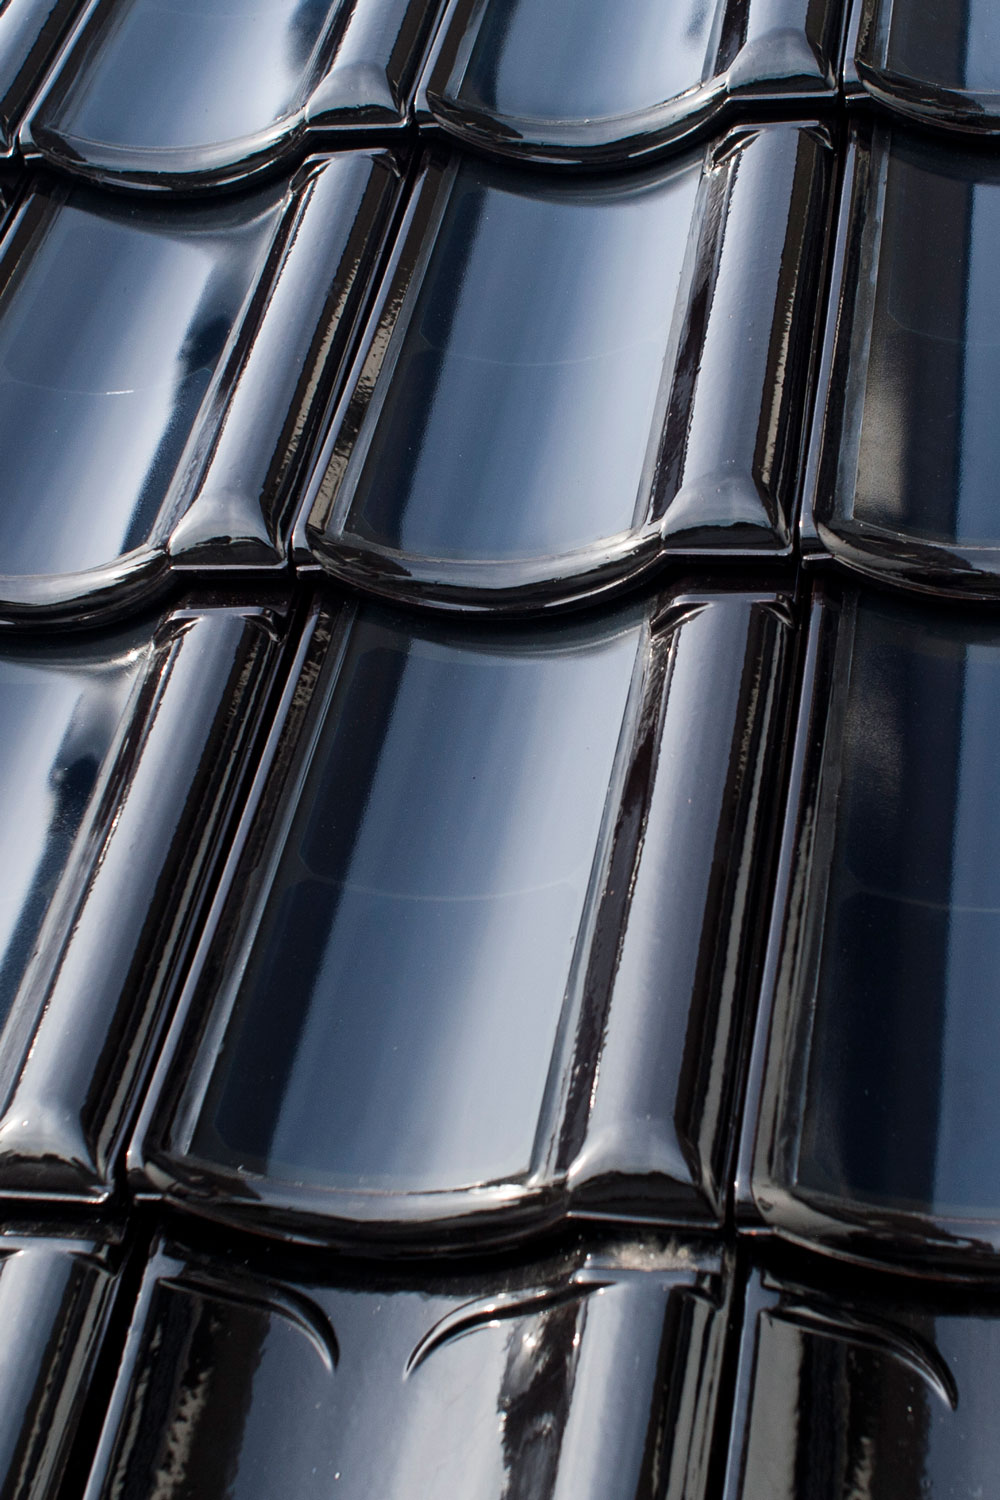 FlexSol solar PV roof tile - BiPV or building integrated PV in the form of a ceramic curved roof tile with flexible PV cells